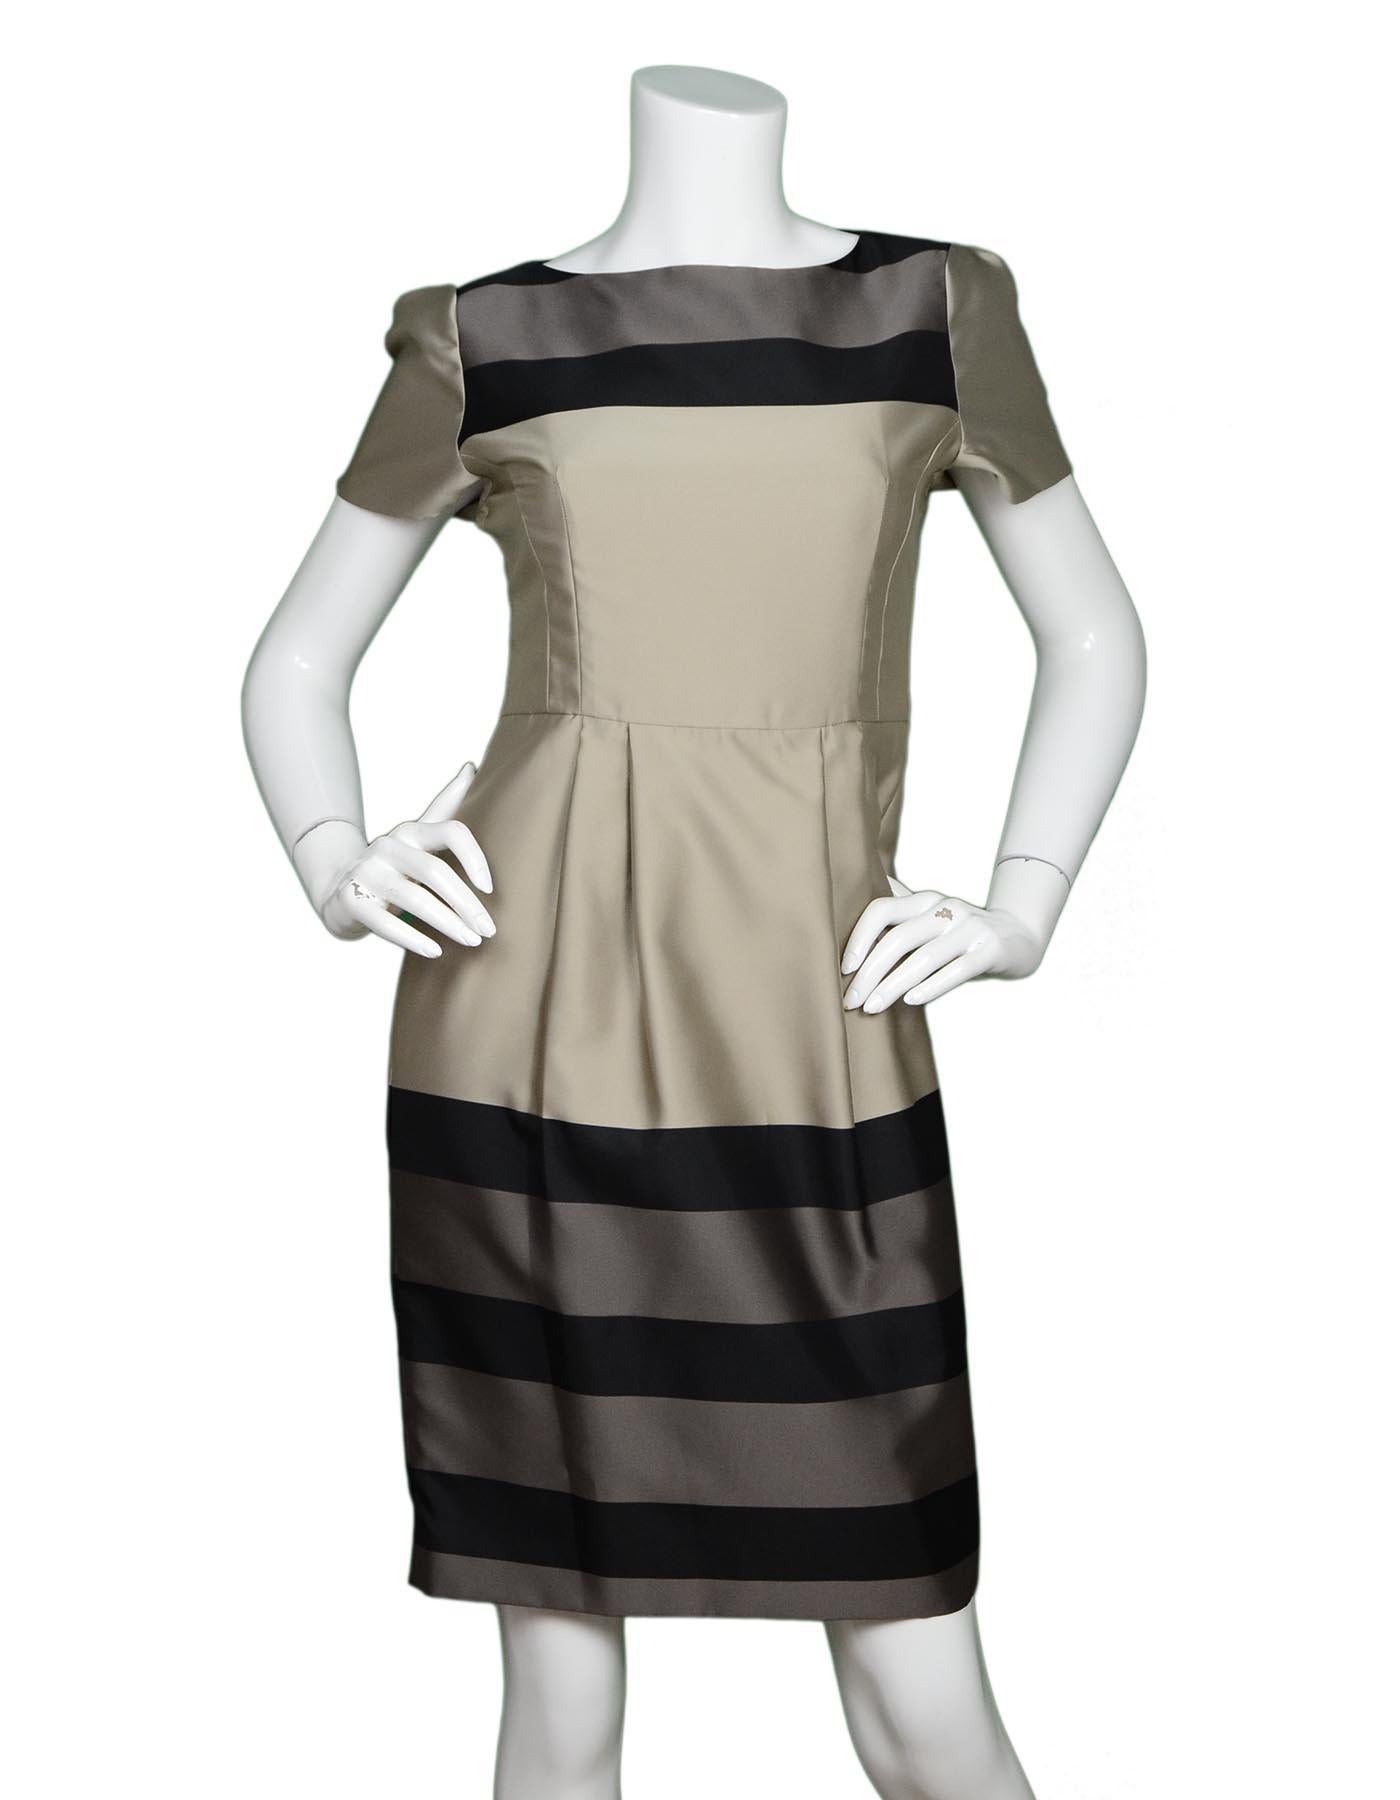 L.K. Bennett Gold/Grey/Black Stripe Shortsleeve Dress Sz 4 NWT

Made In: Romania
Color: Gold, grey, black
Materials: 100% polyester
Lining: 100% acetate 
Opening/Closure: Hidden back zipper
Overall Condition: Excellent condition with original tags